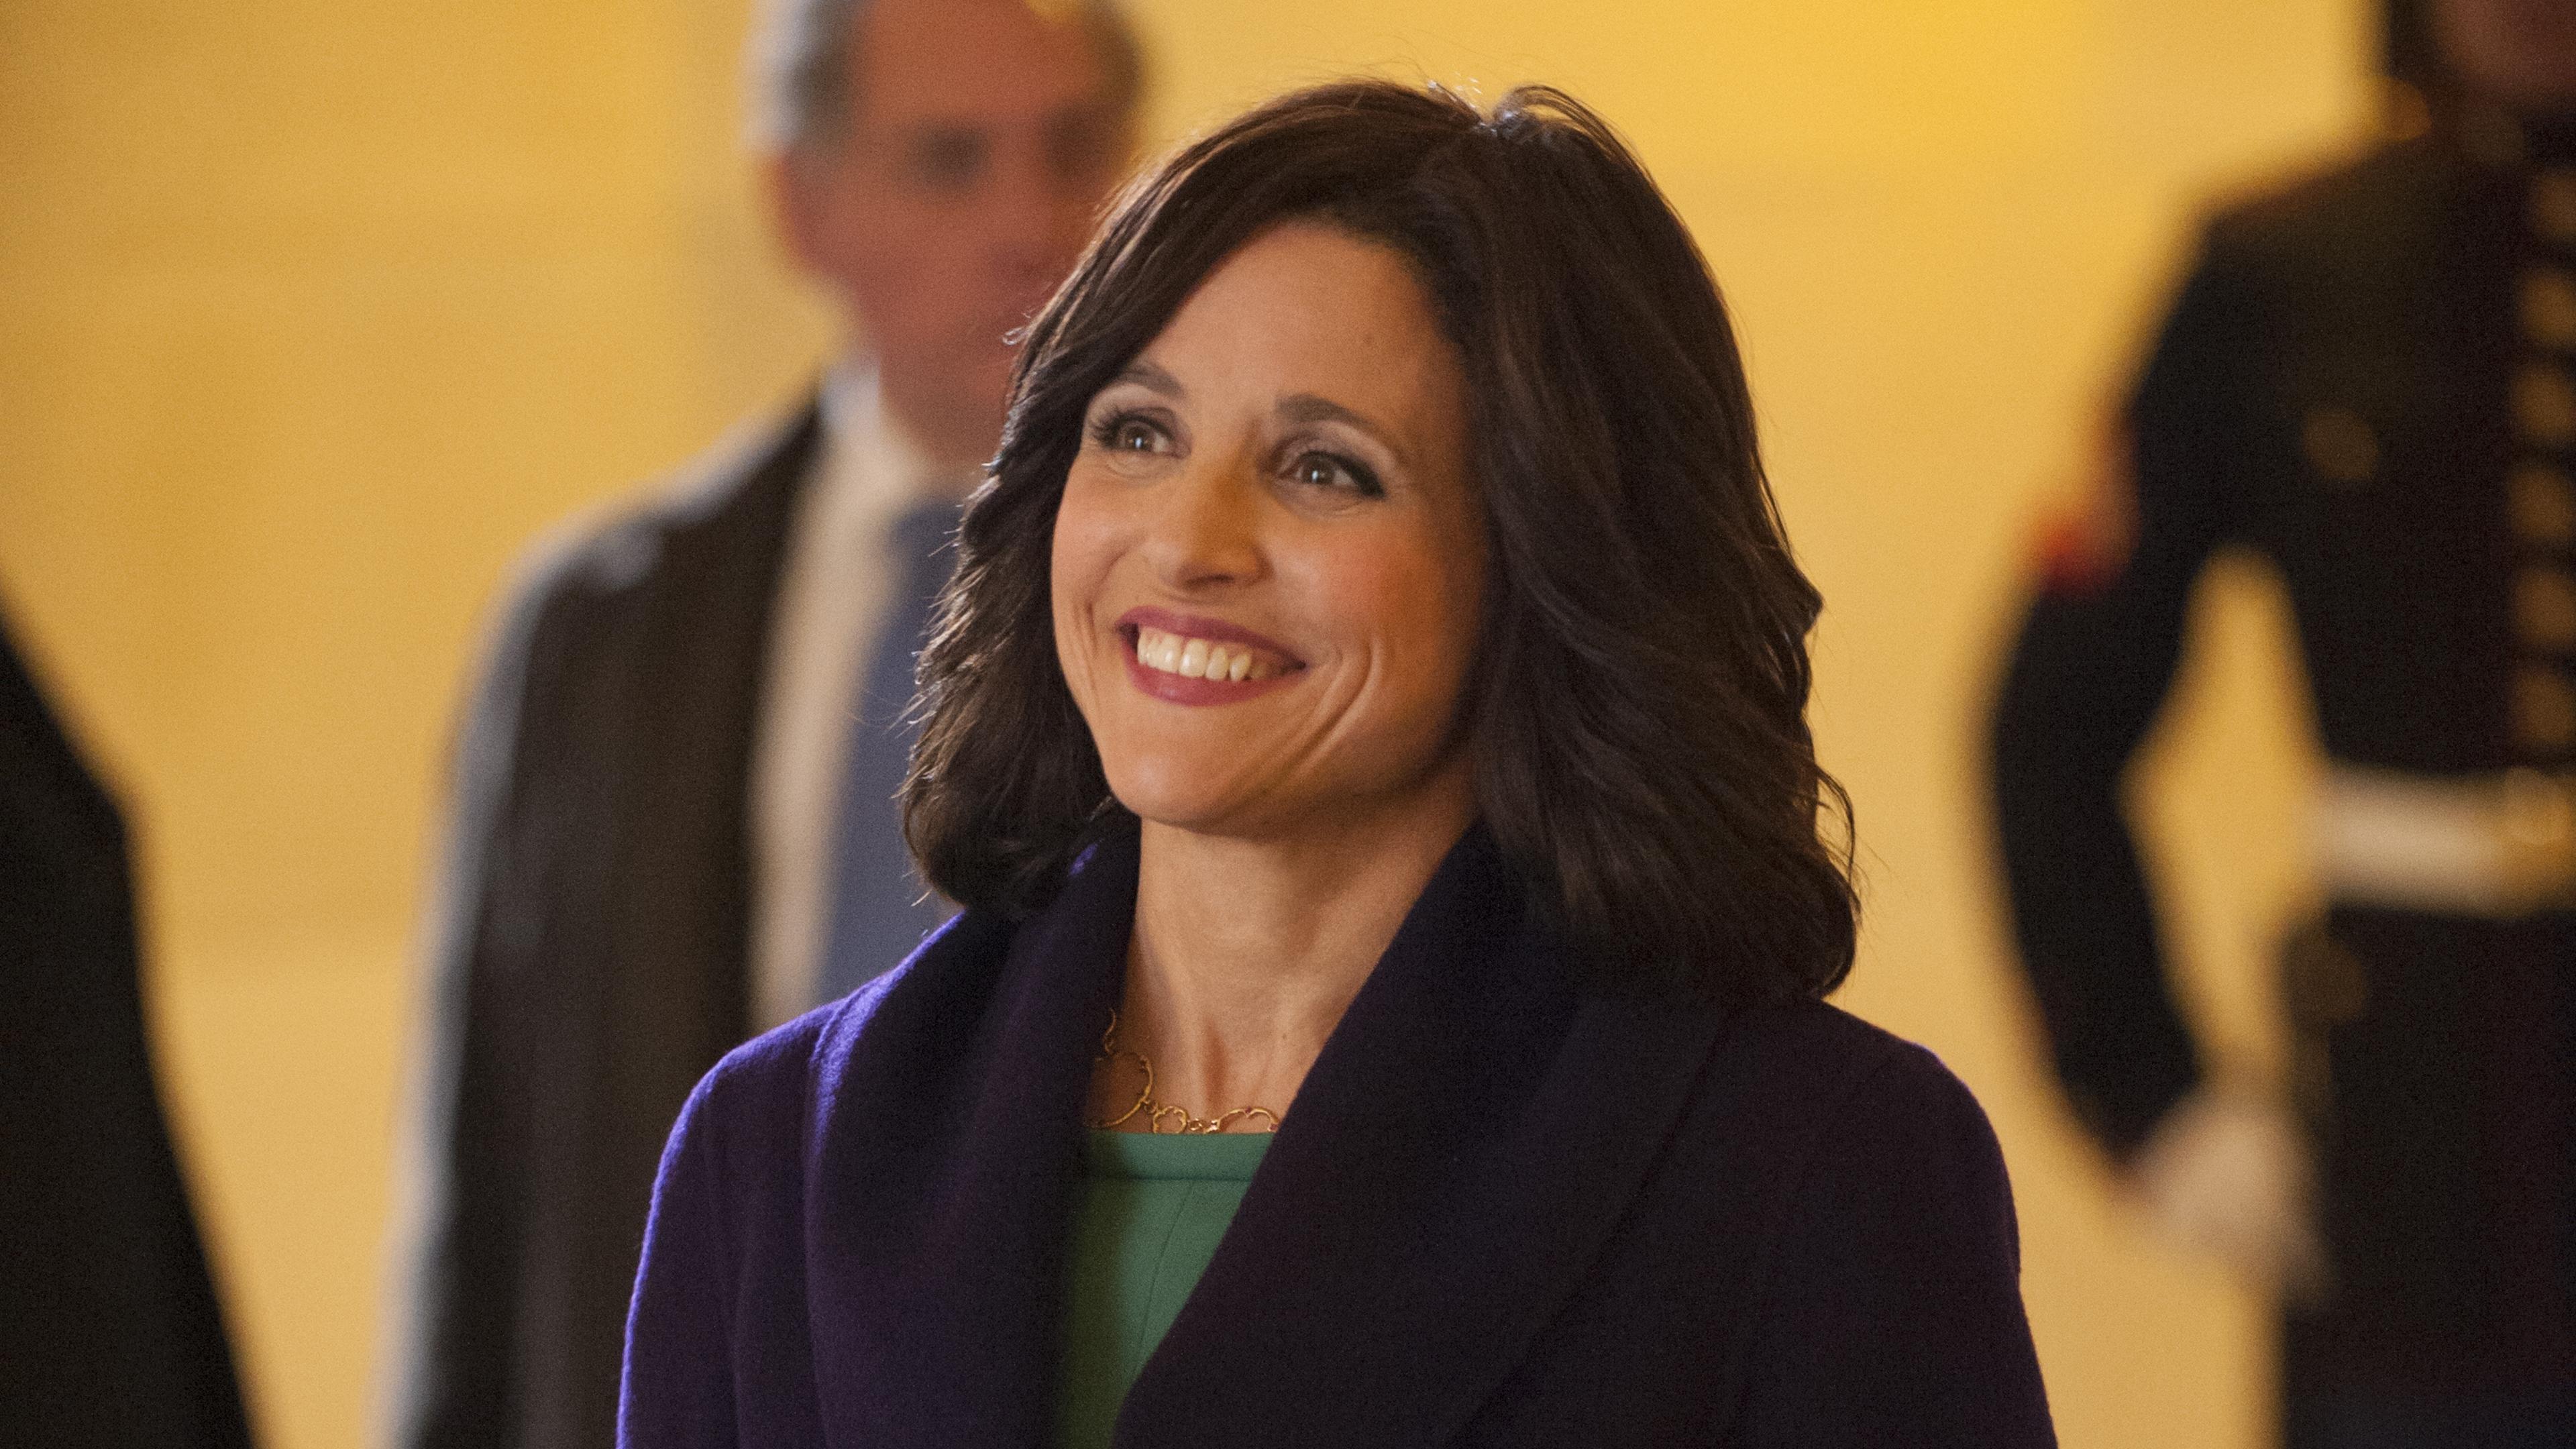 Veep': Watch Selina Meyer's Full Disastrous 'Tonight Show' Appearance